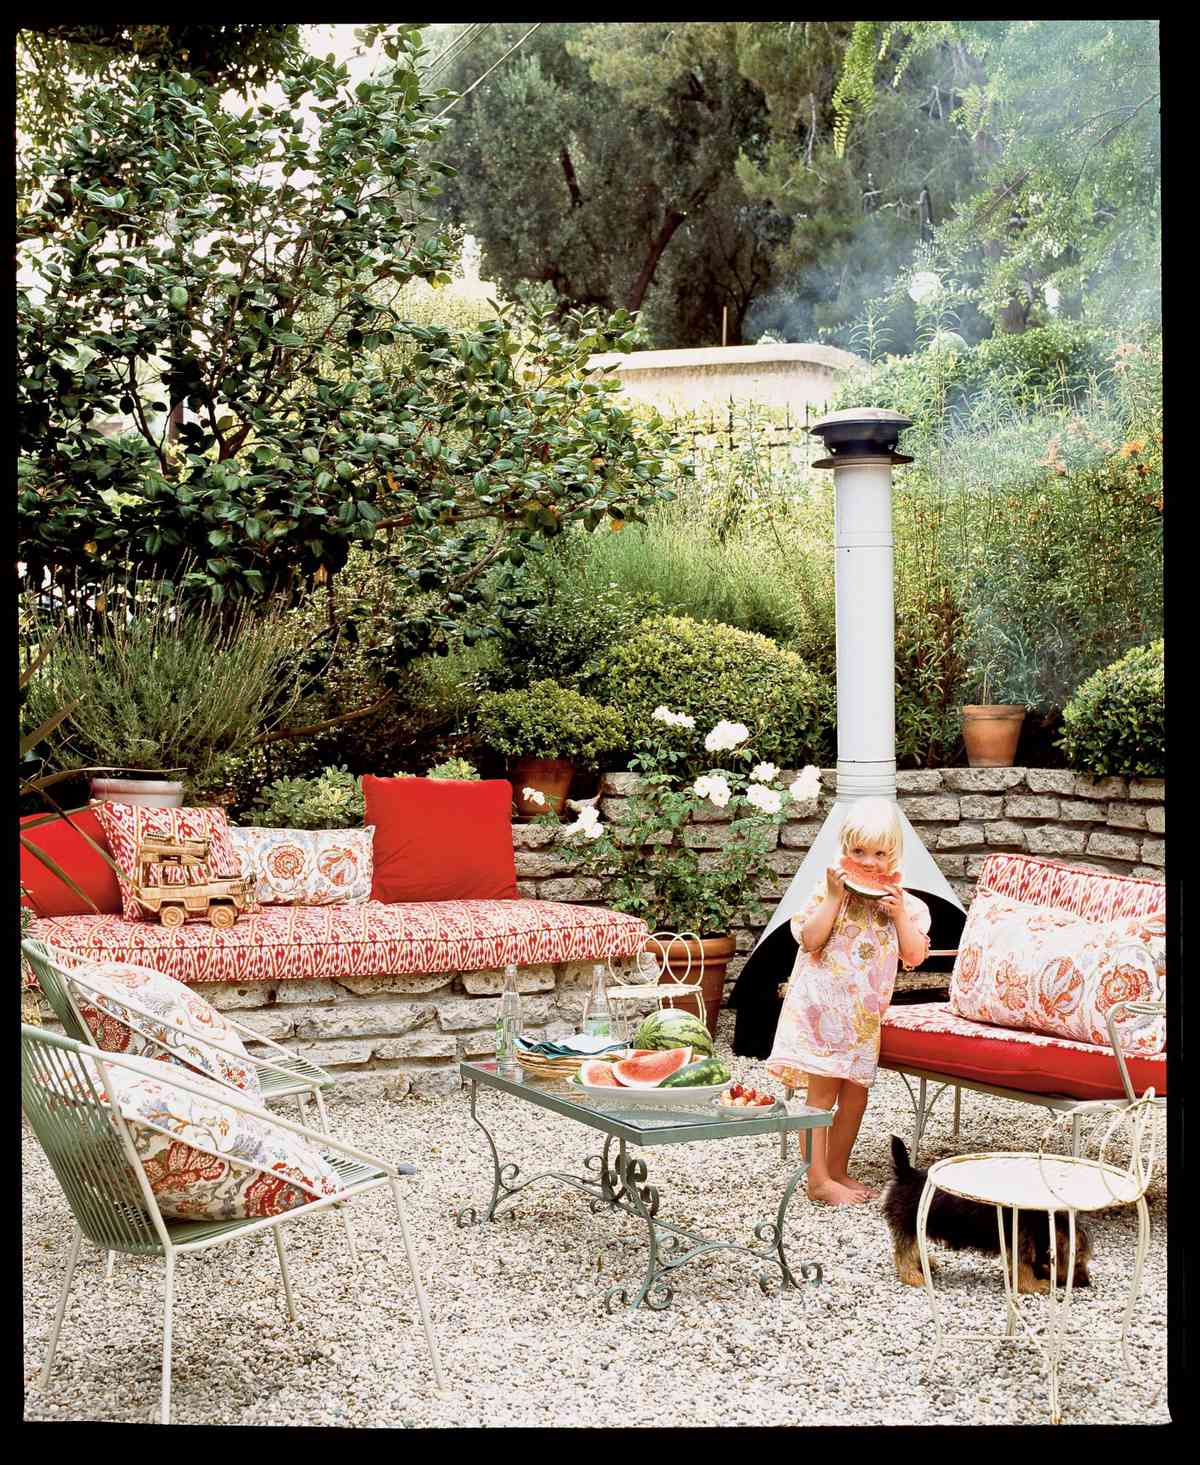 <p>Bright red throw pillows and patterned fabrics bring this outdoor space to life. A low stone wall creates a natural barrier around the living space, and pebbles replace grass underfoot for a low-maintenance ground covering.</p>
                            